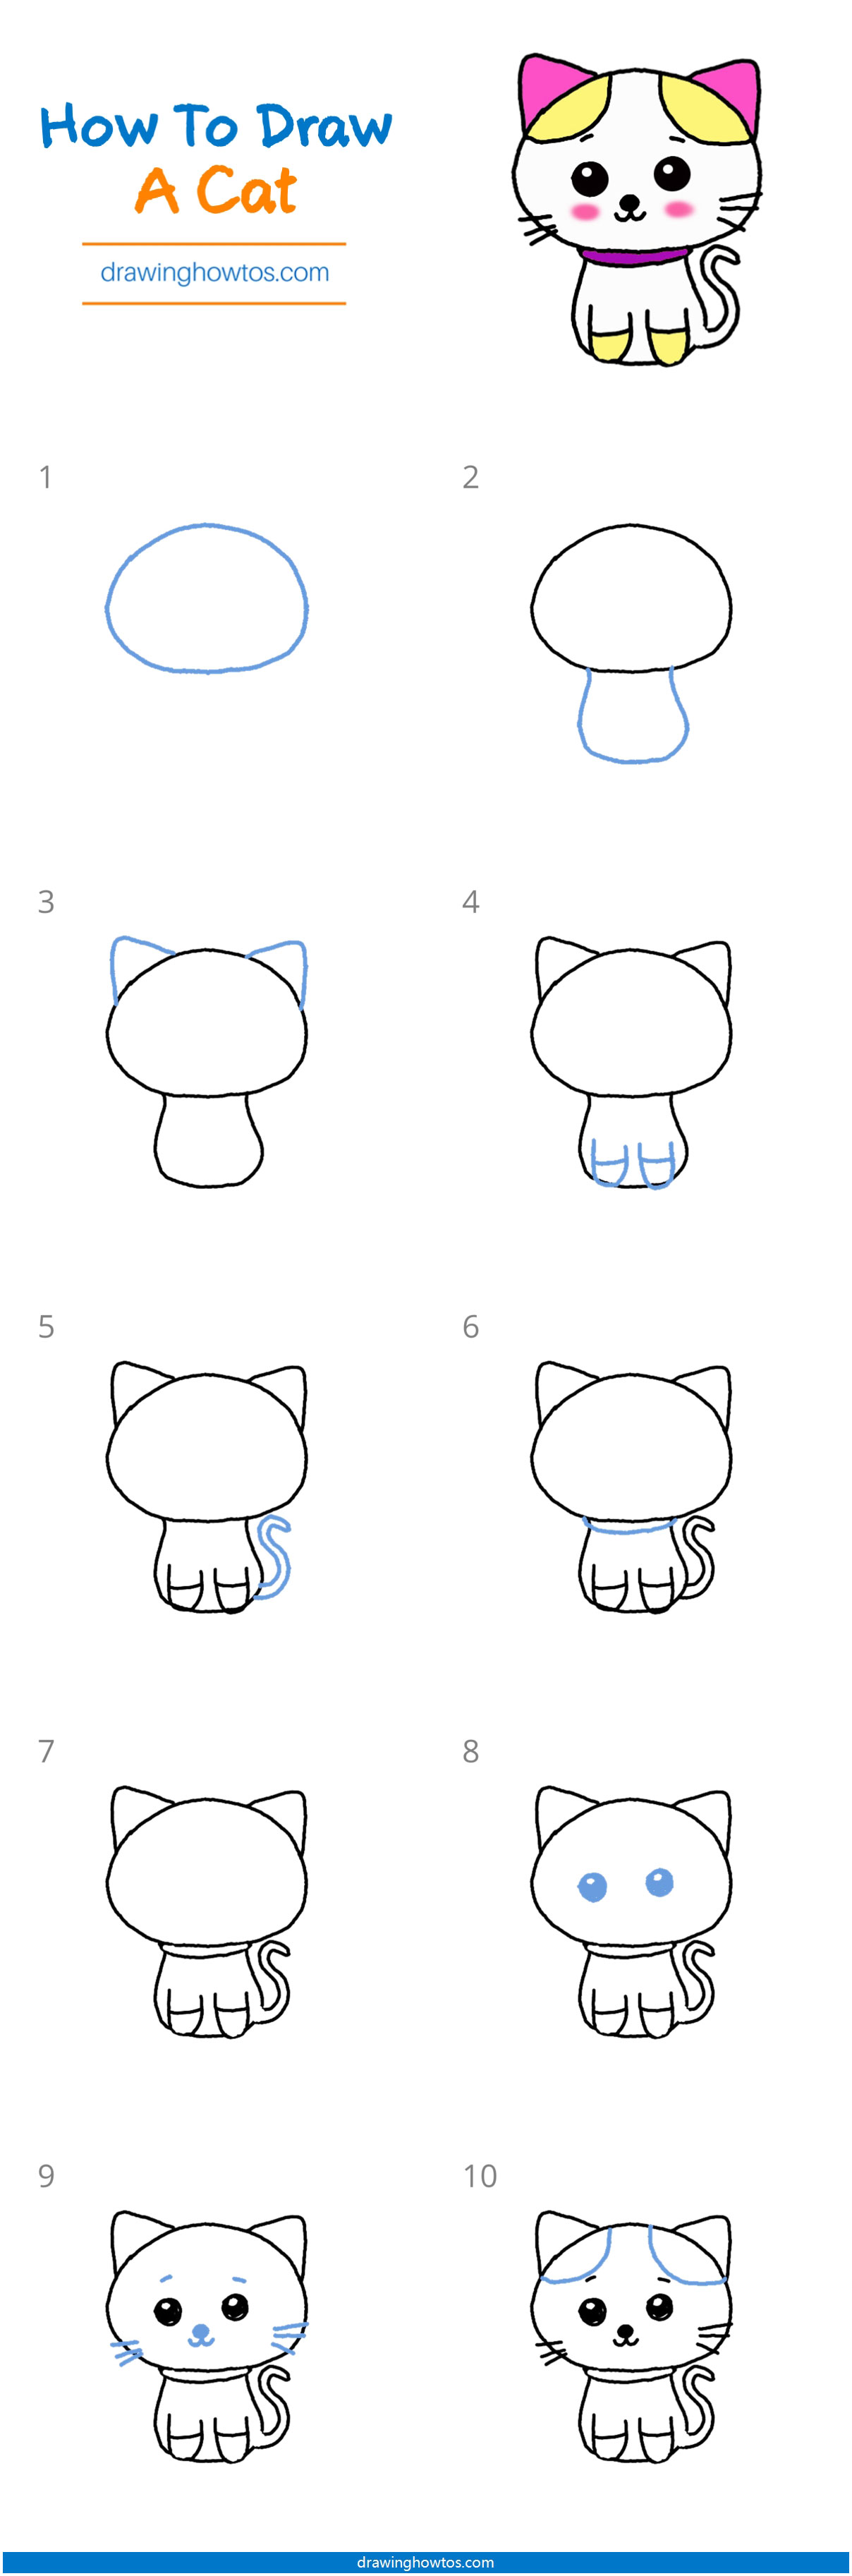 How To Draw A Cat Easy Steps